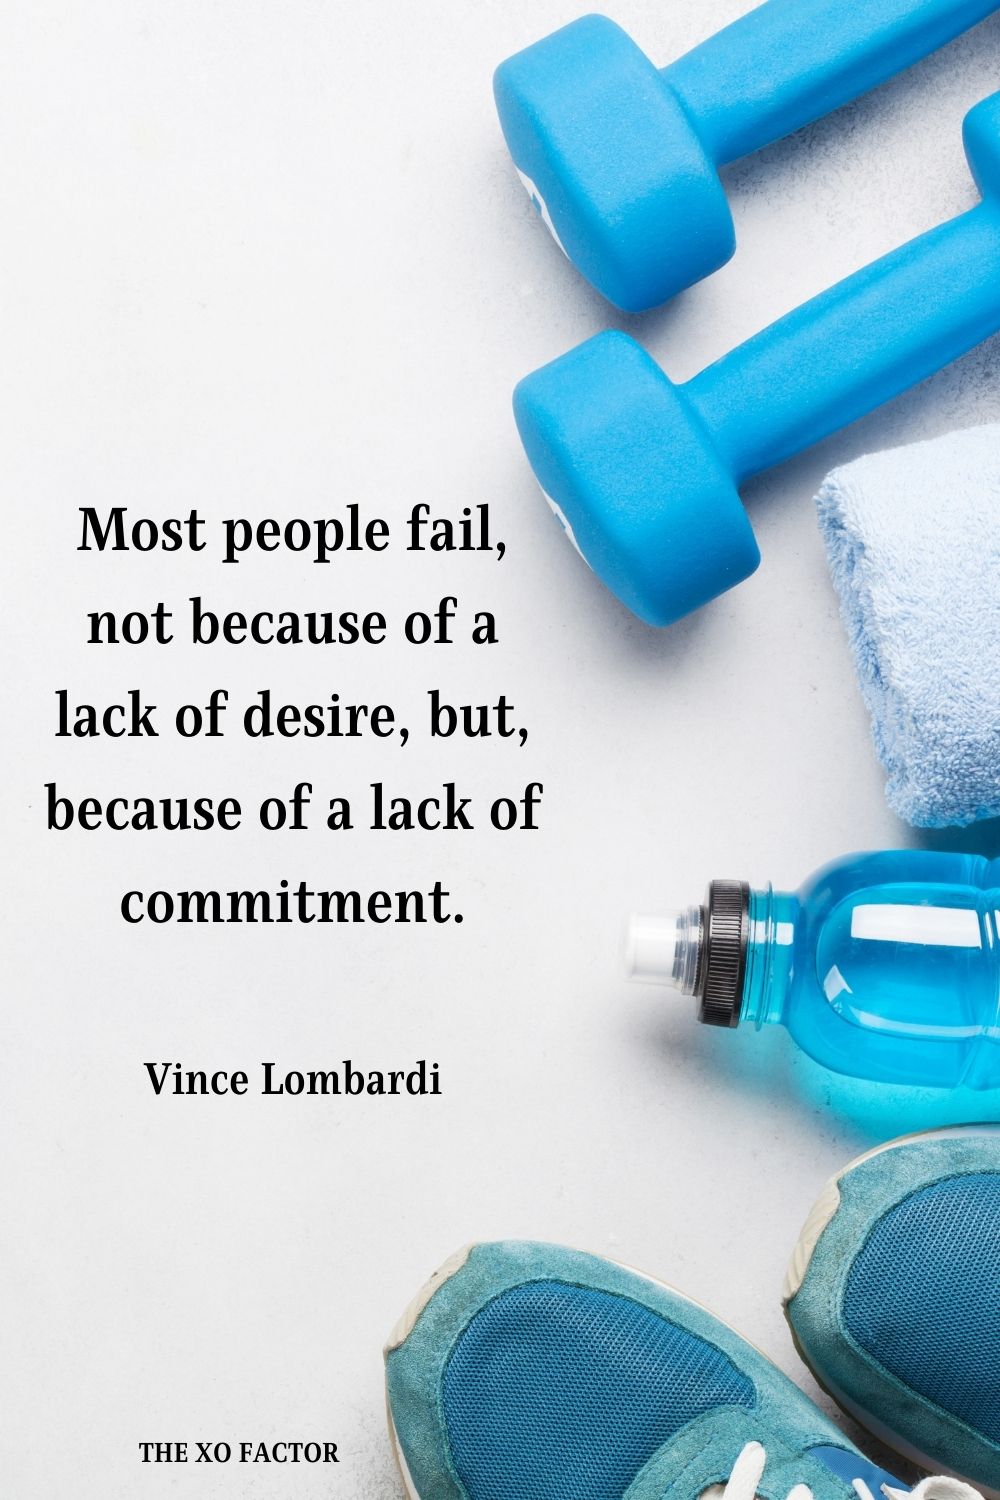 Most people fail, not because of a lack of desire, but, because of a lack of commitment. Vince Lombardi